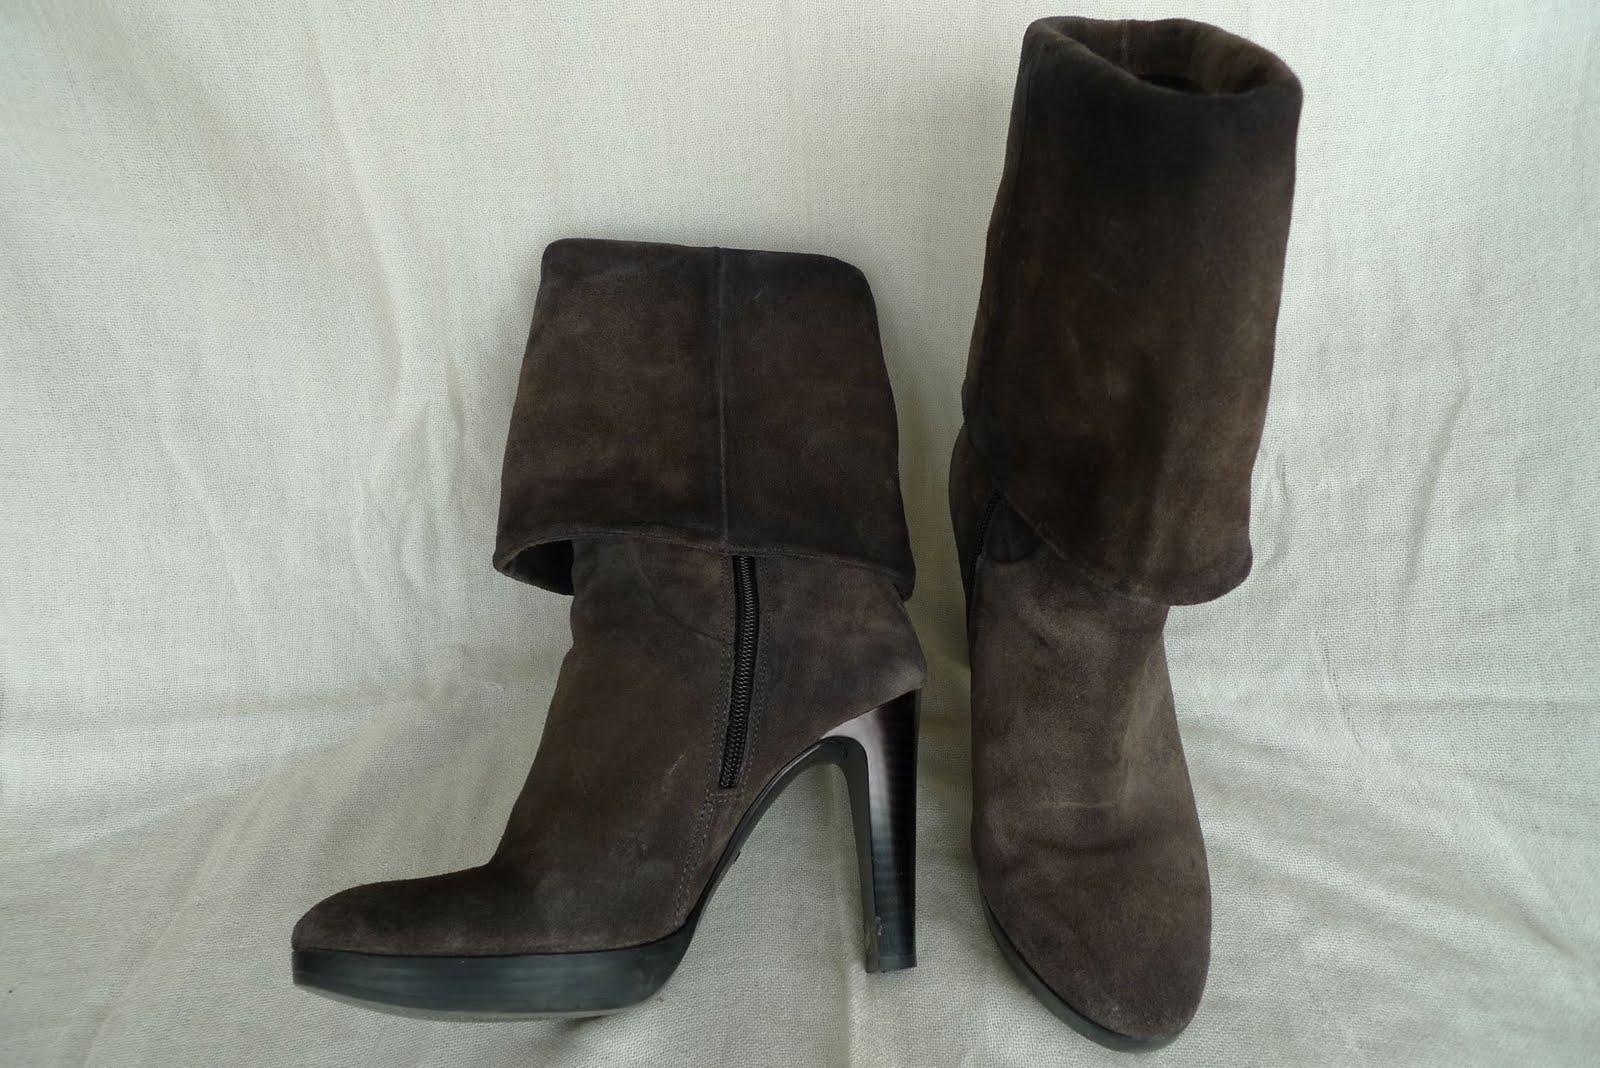 The Shoe Blog: YKX & Co. mid-calf boots 100mm in brown suede